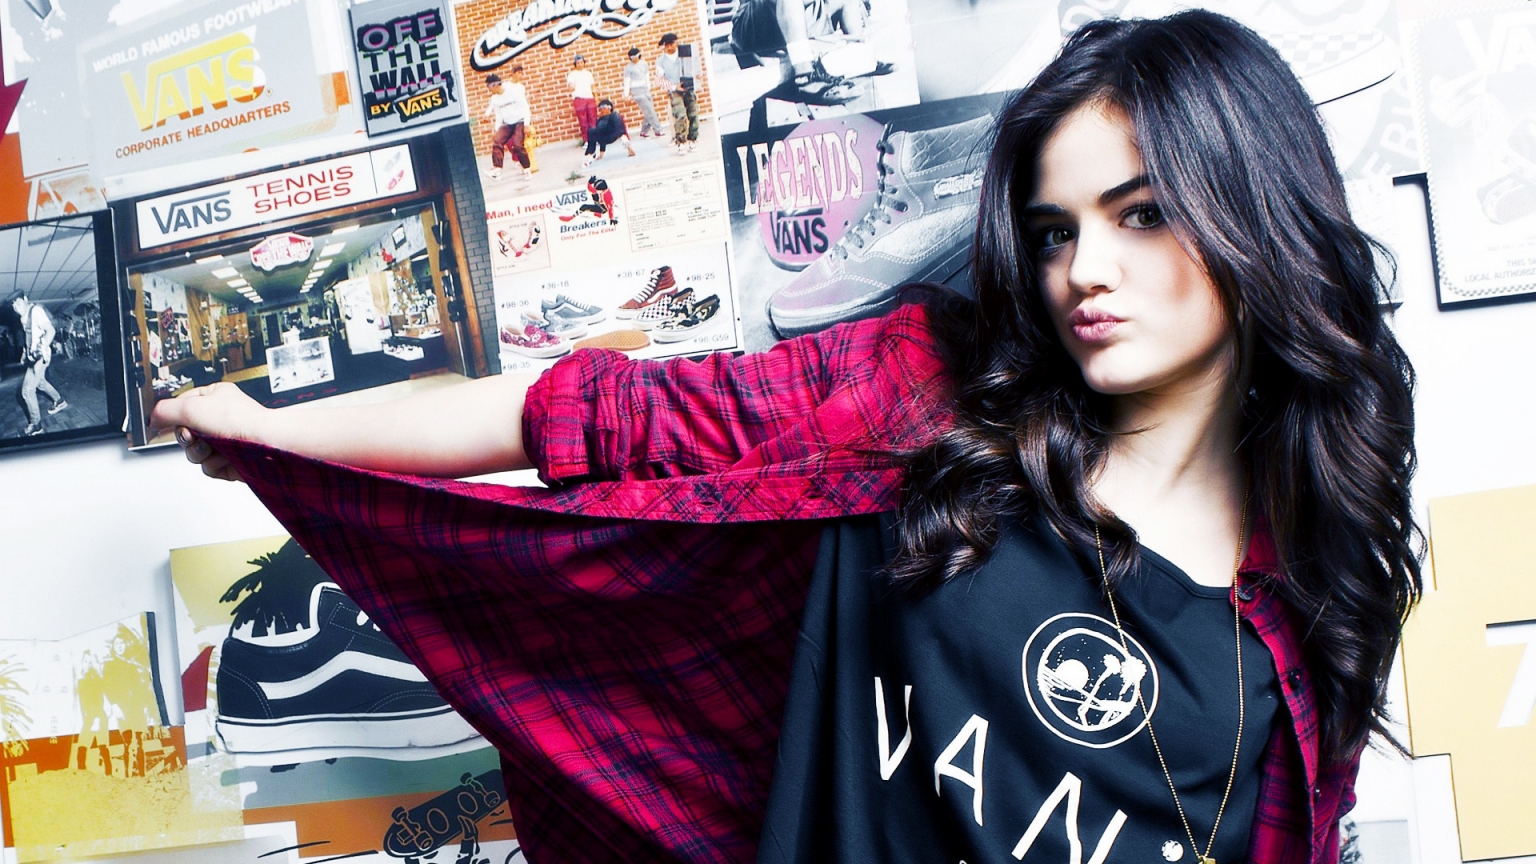 Lucy Hale for 1536 x 864 HDTV resolution